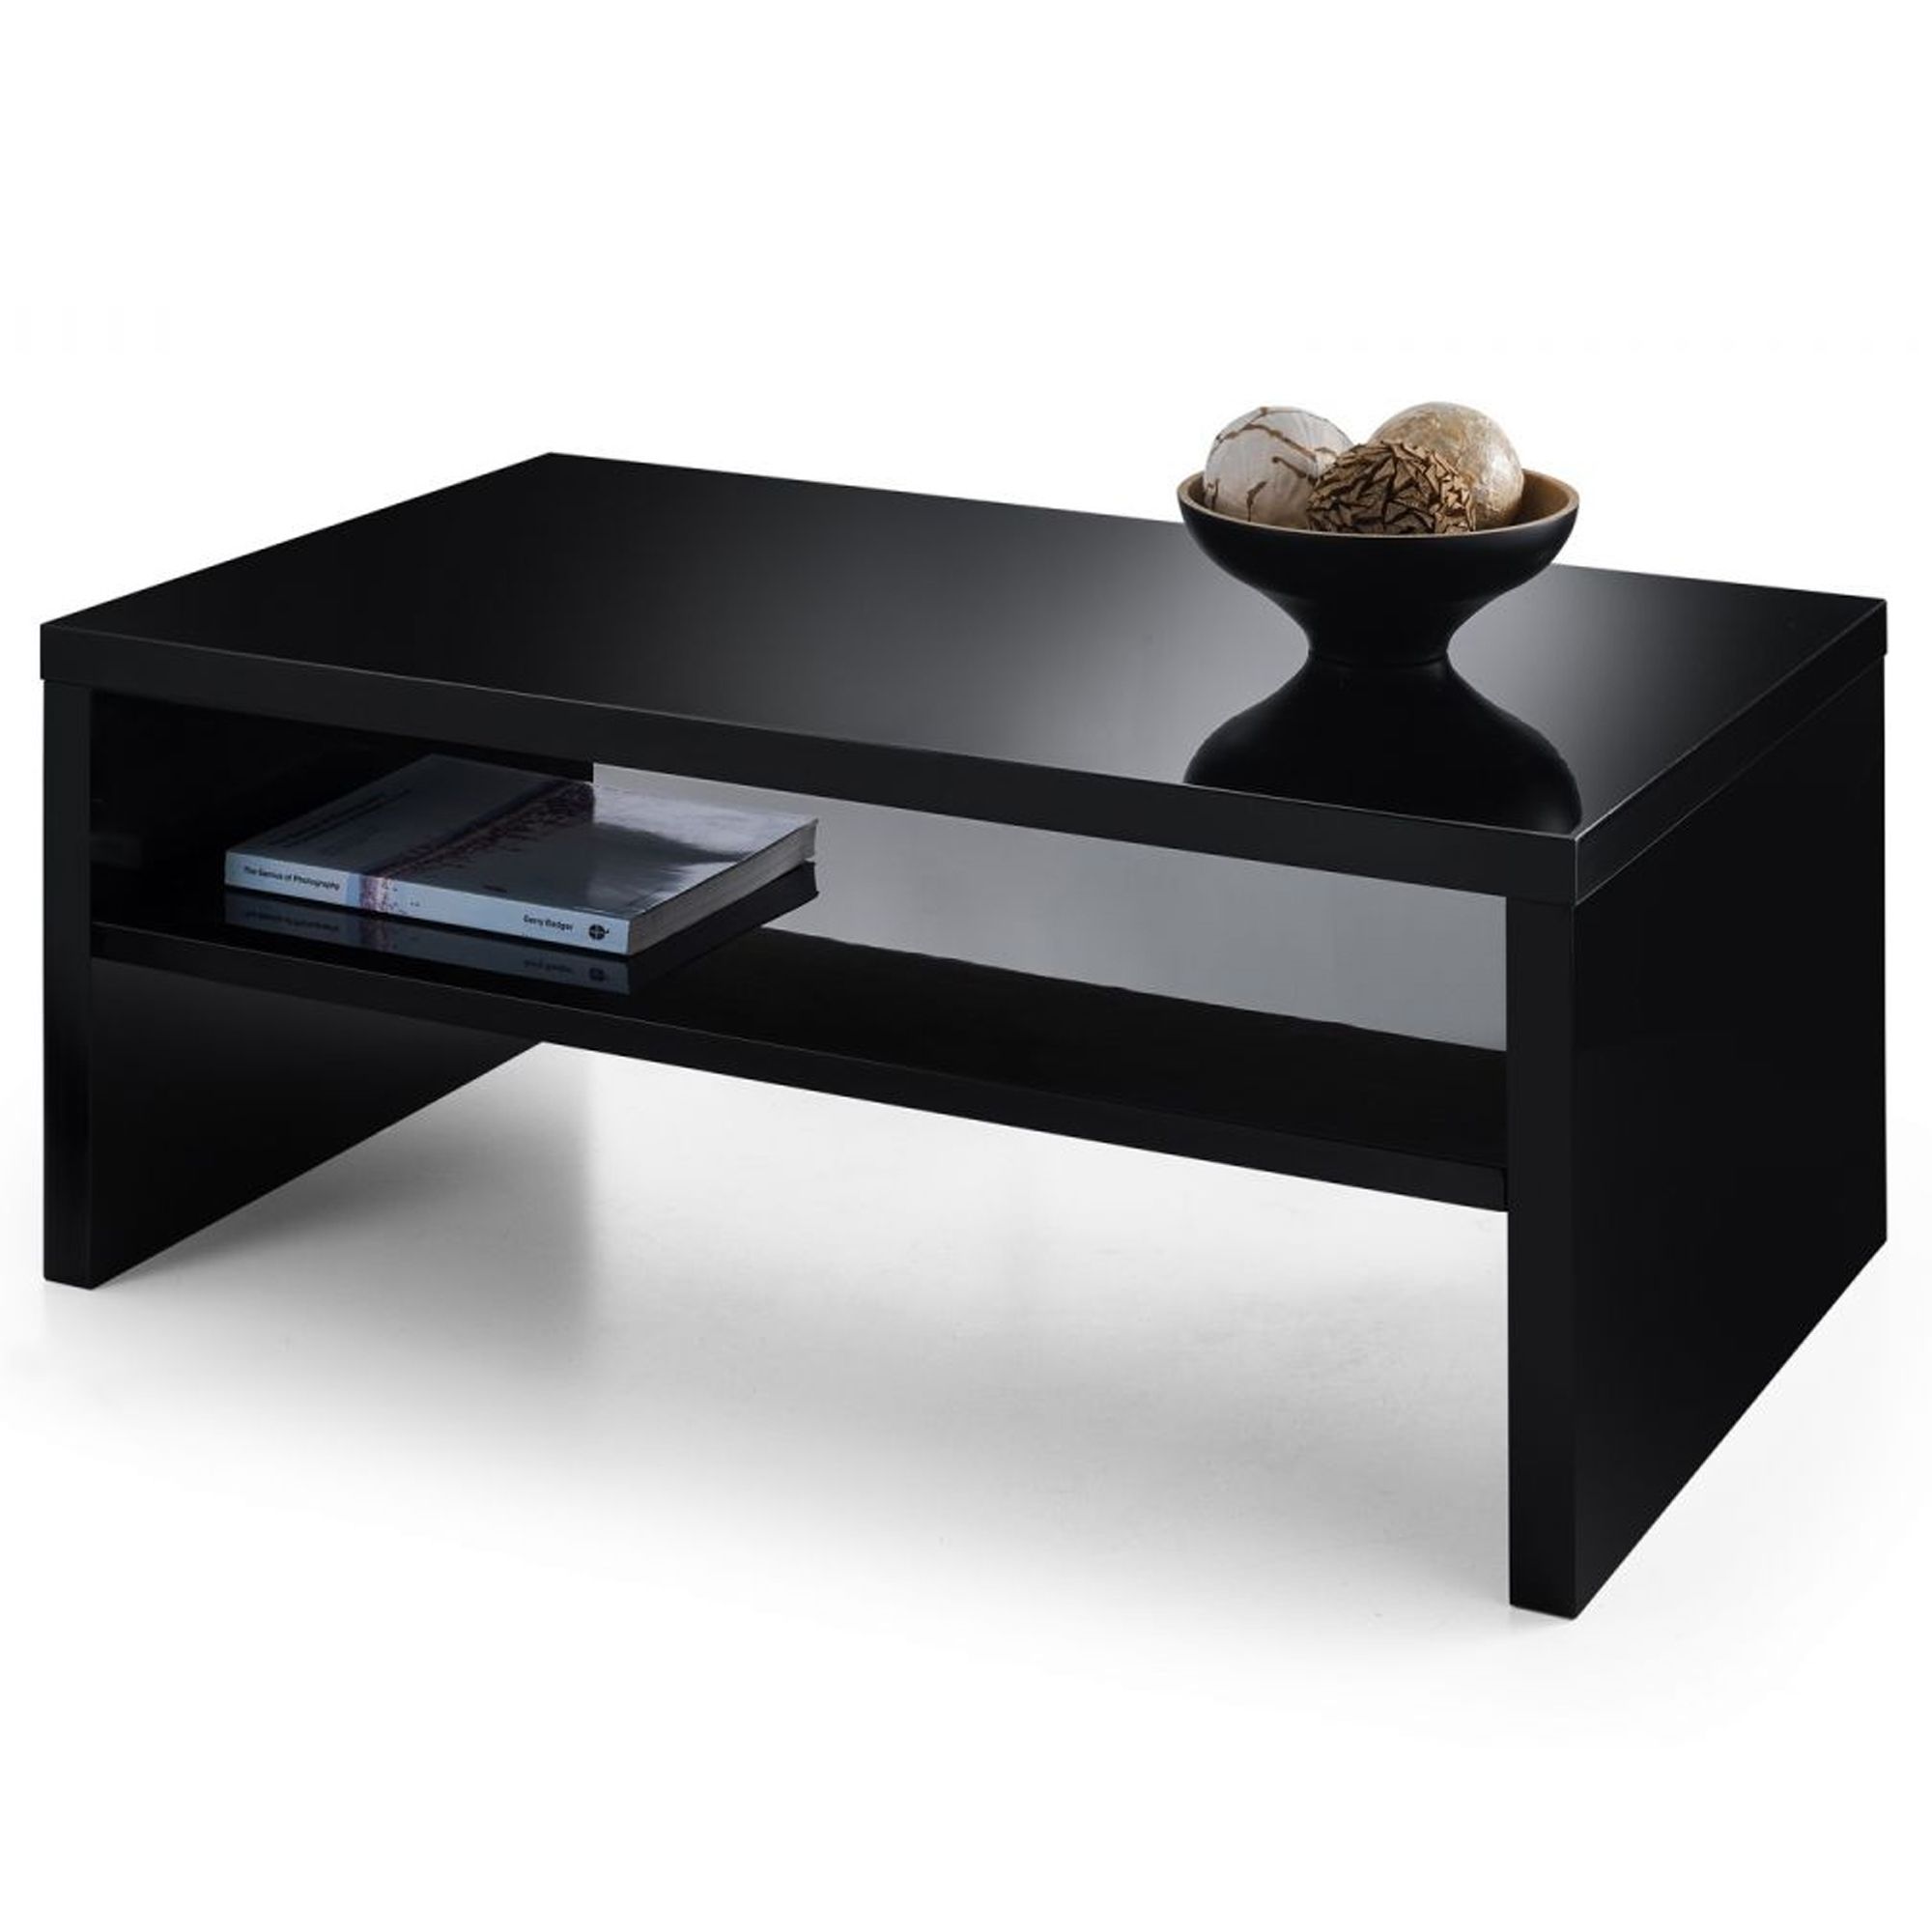 Black Metro High Gloss Coffee Table | Contemporary Lounge Furniture With Regard To High Gloss Black Coffee Tables (Gallery 1 of 20)